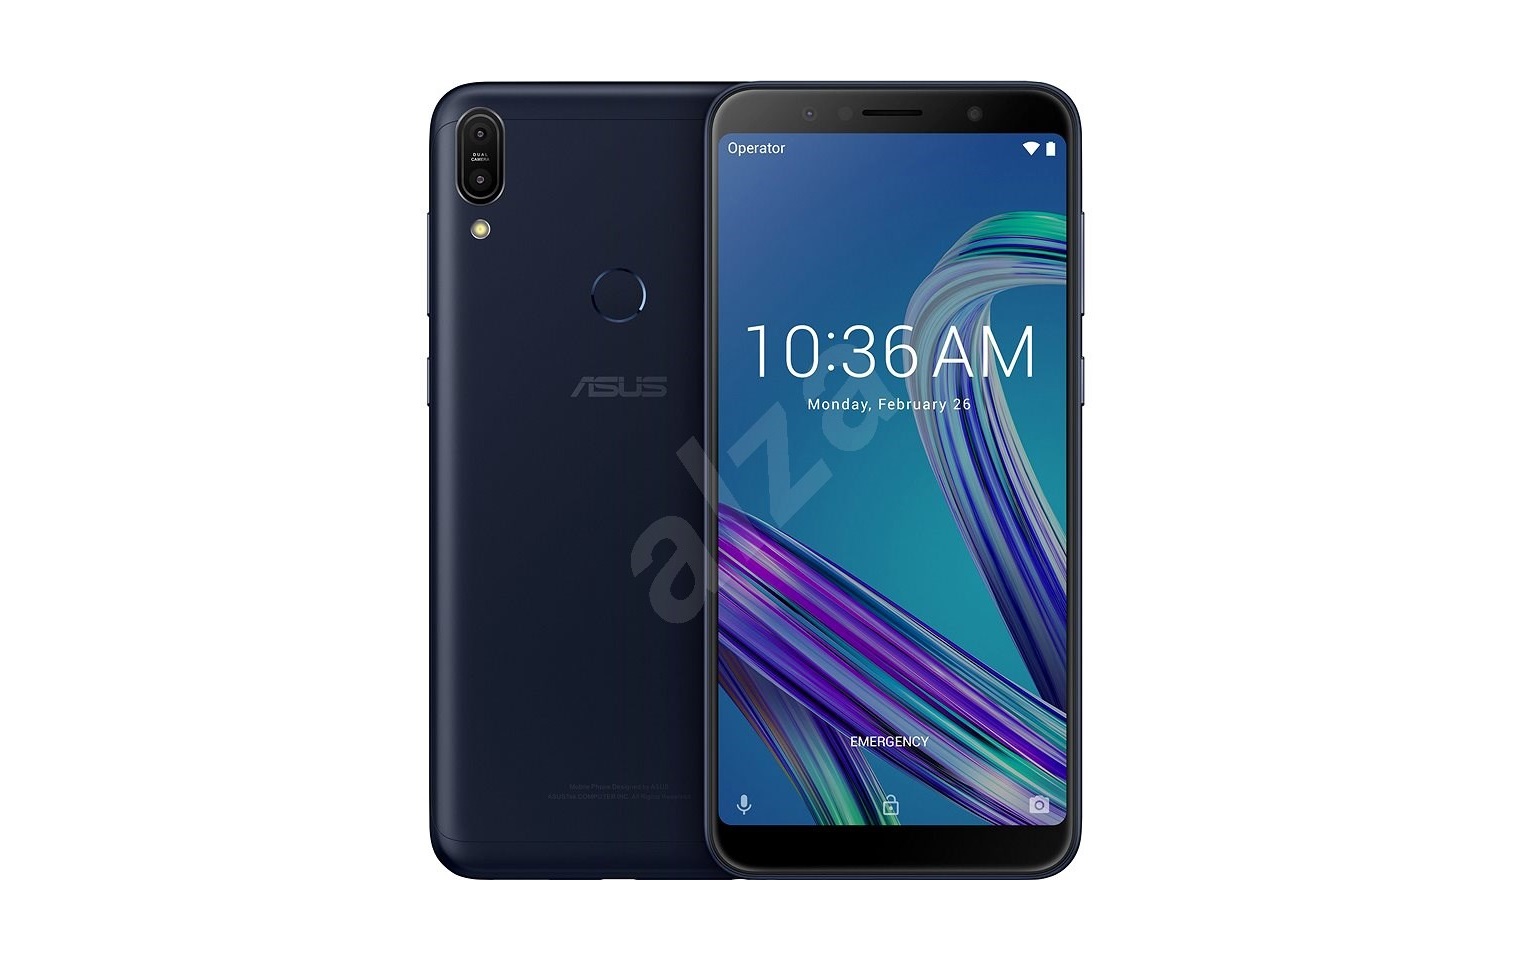 [Solved] - Disable Safe Mode on Asus Zenfone Max Pro